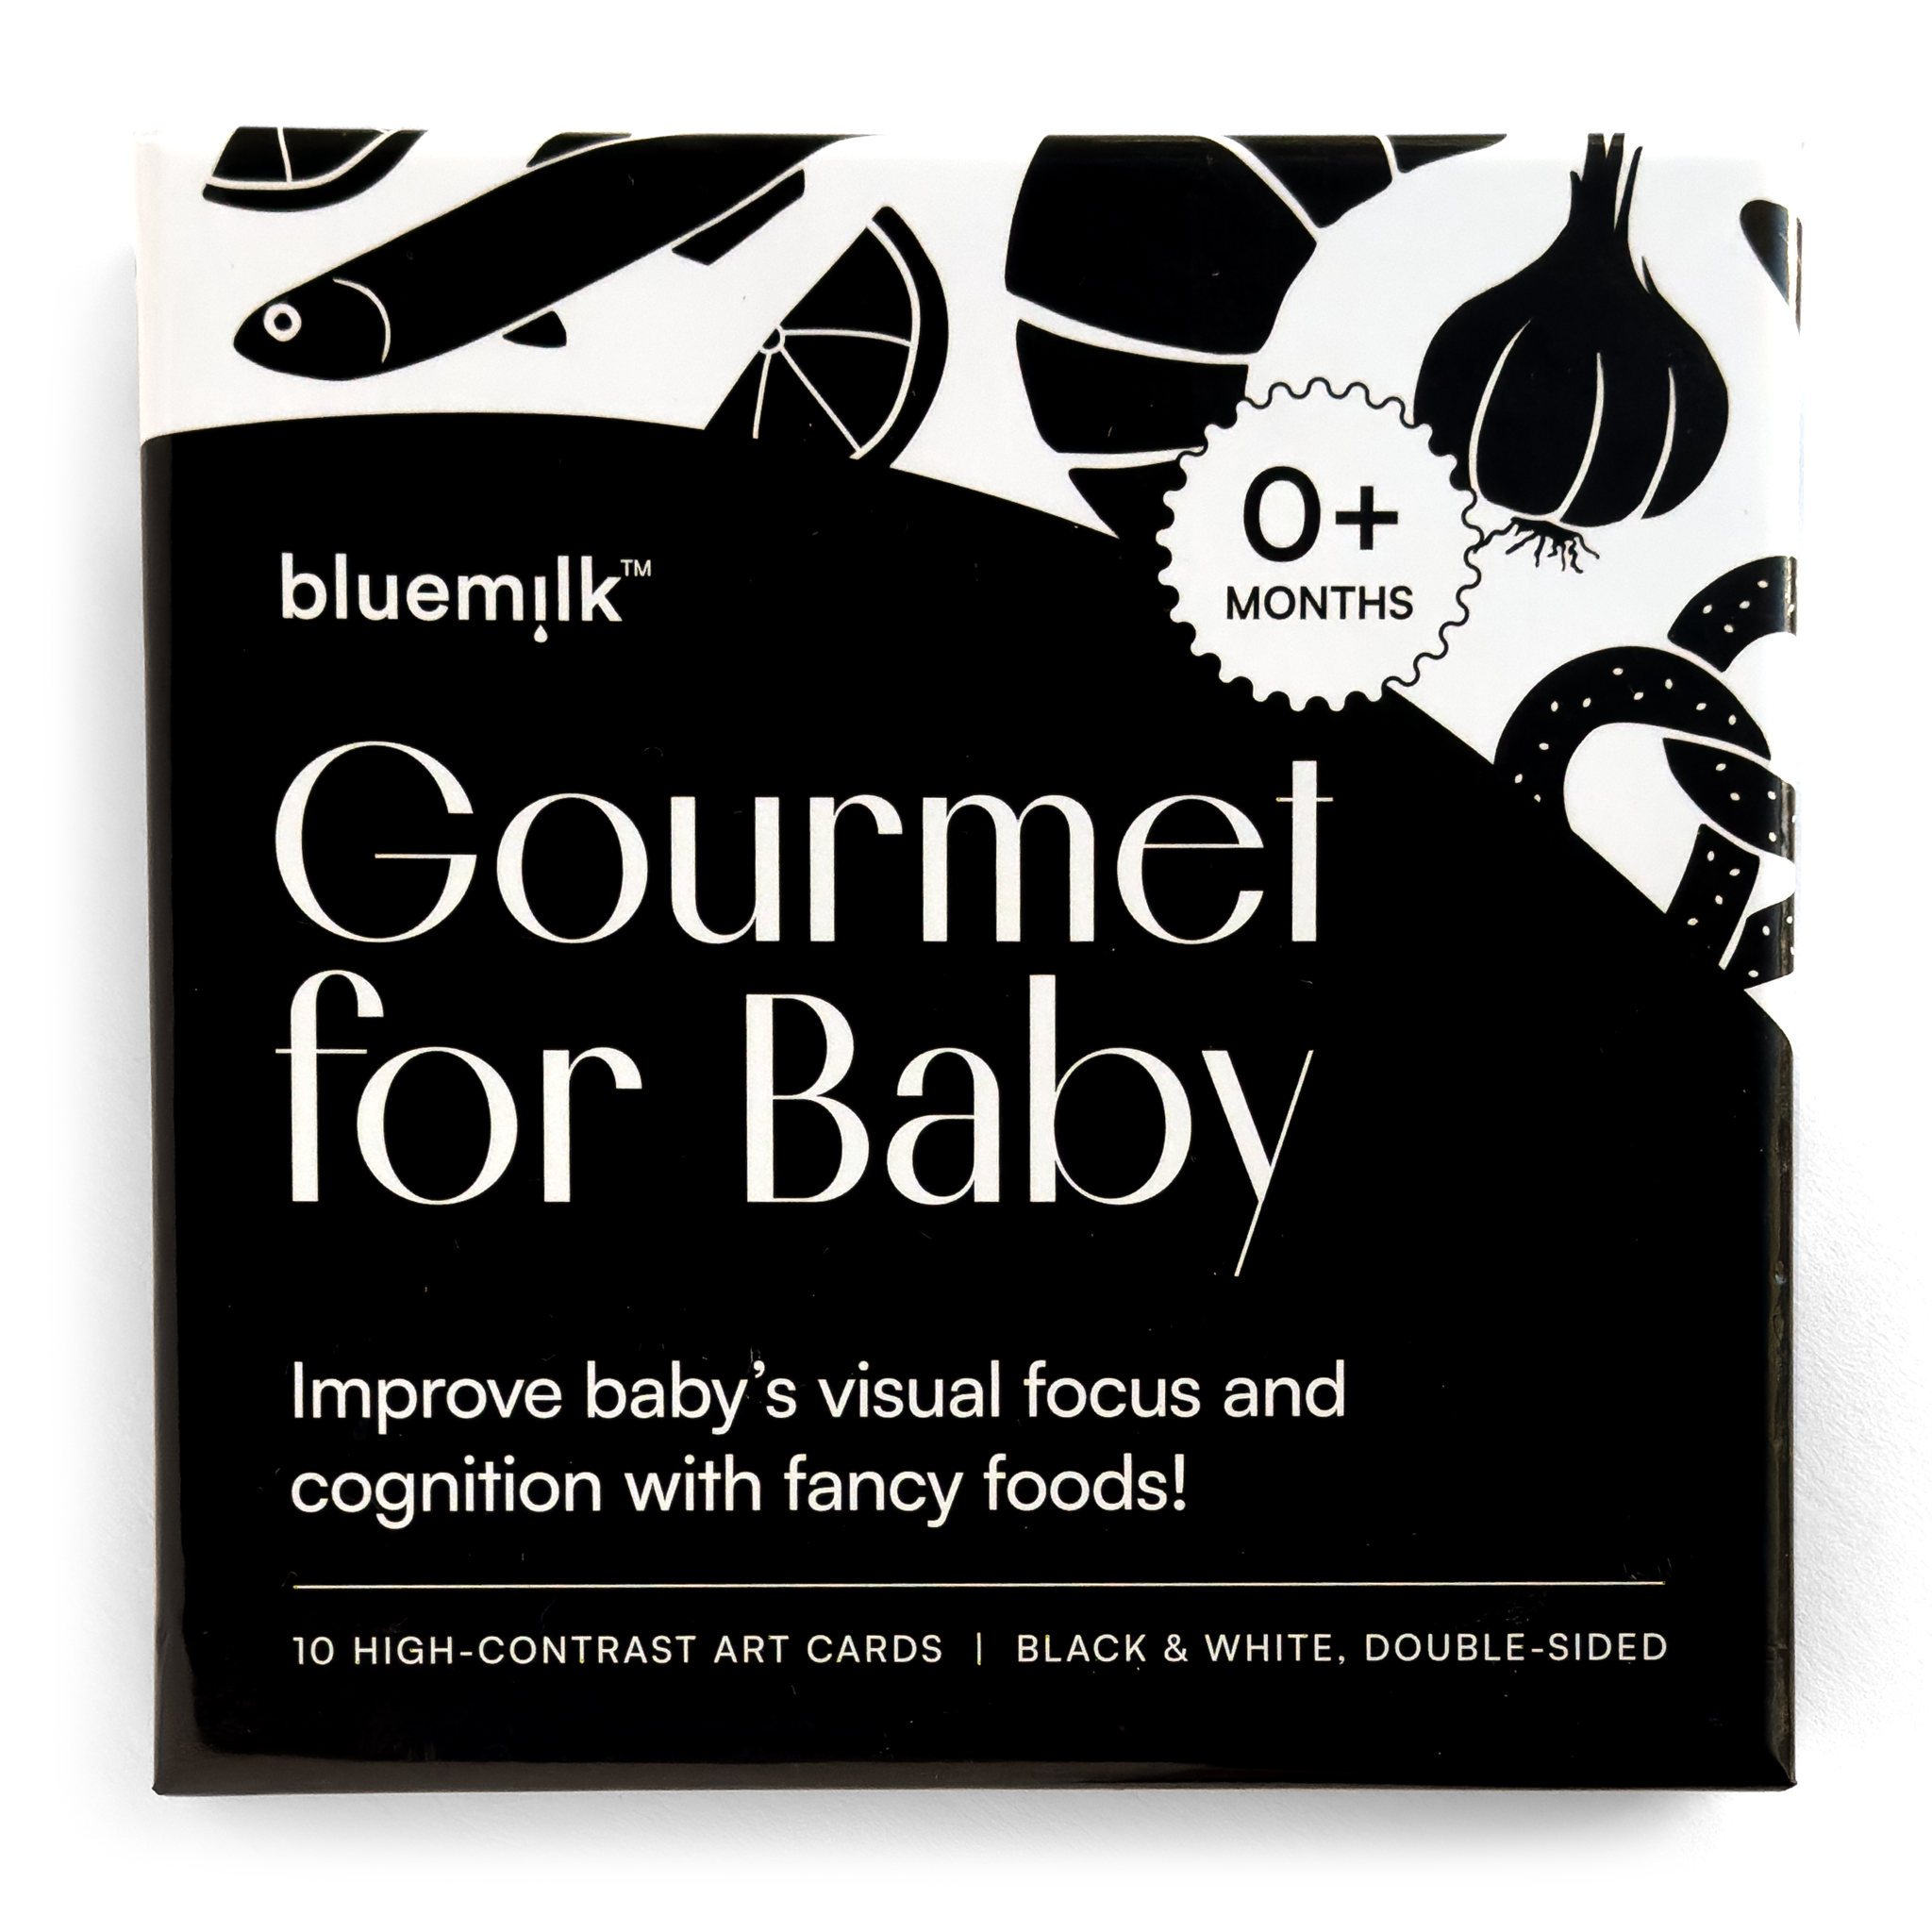 "Gourmet for Baby" High-Contrast Art Cards